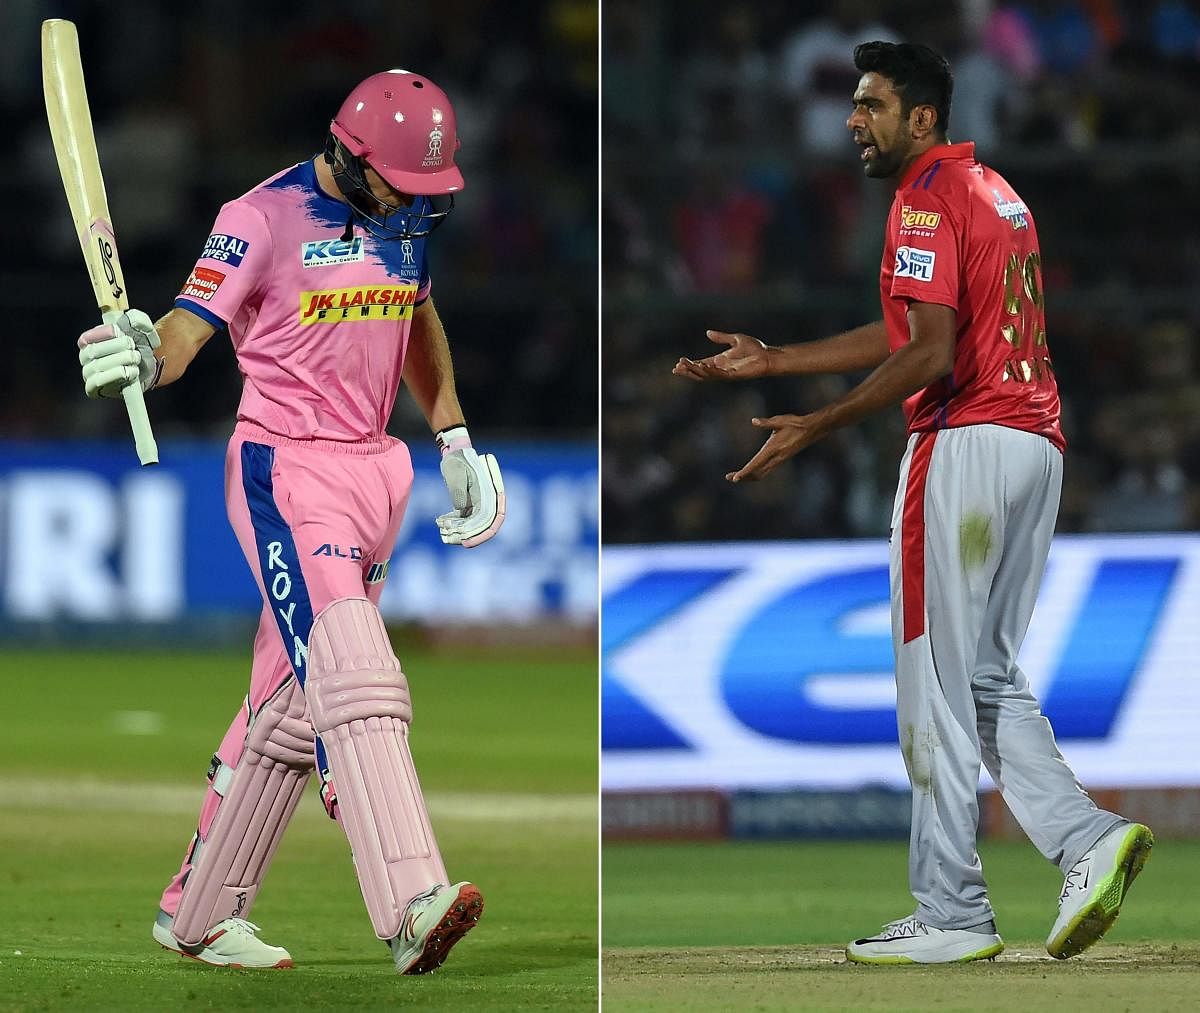 Rajasthan Royals' Jos Buttler walks back in anger after he was "mankaded" by Kings XI Punjab's R Ashwin in Jaipur on Monday. AFP